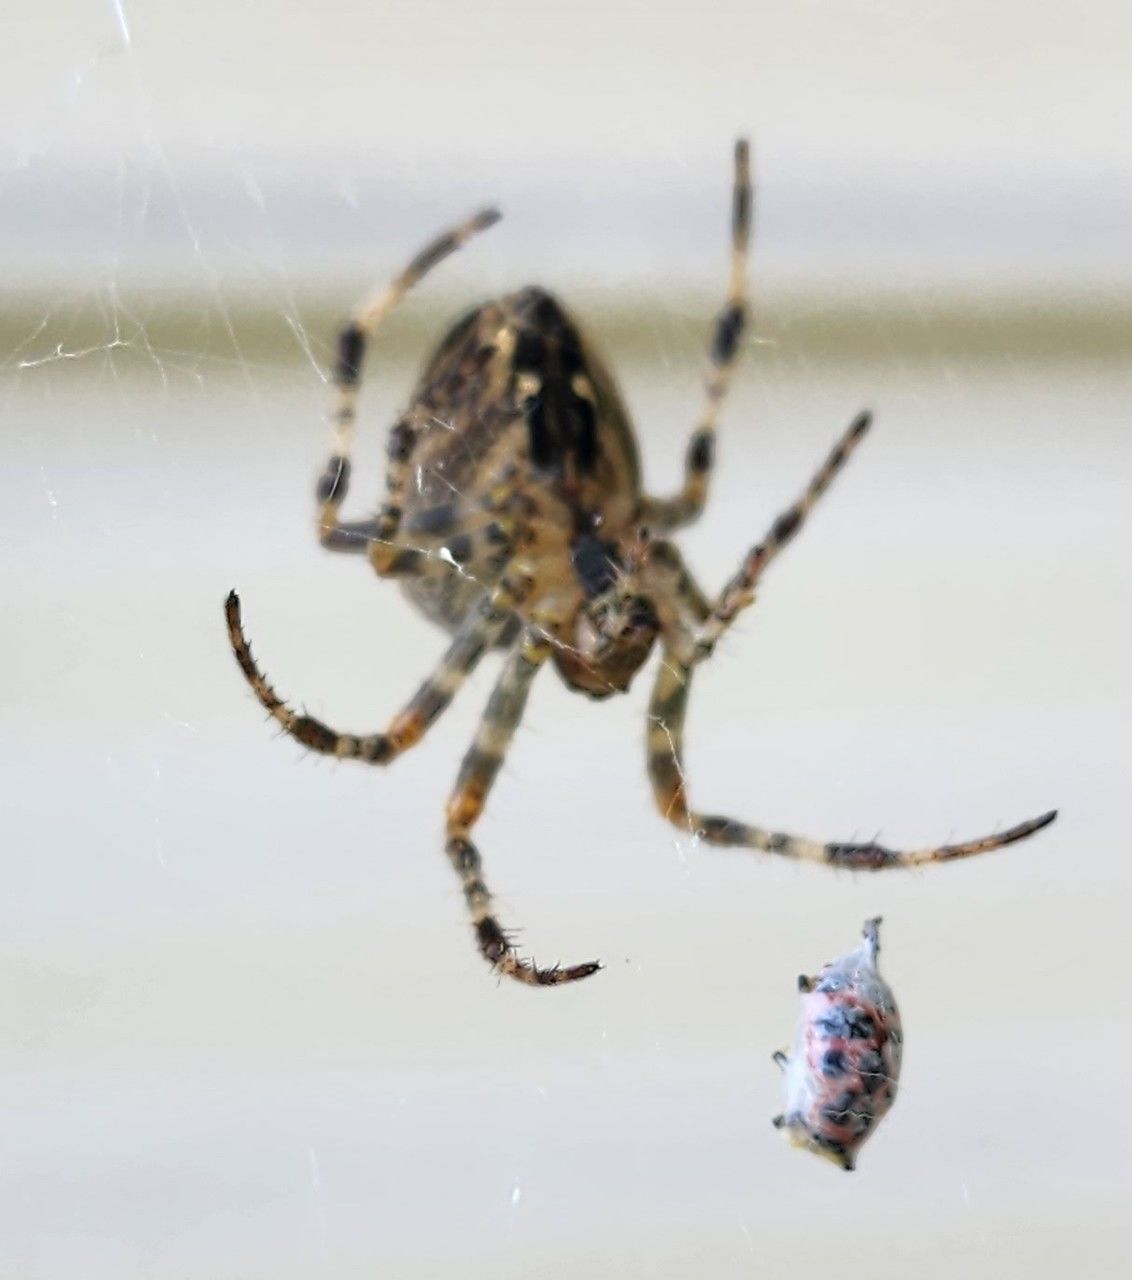 animal themes, animal, animal wildlife, one animal, arachnid, spider, close-up, wildlife, insect, macro photography, spider web, animal body part, focus on foreground, nature, fragility, no people, animal leg, zoology, limb, outdoors, macro, selective focus, water, day